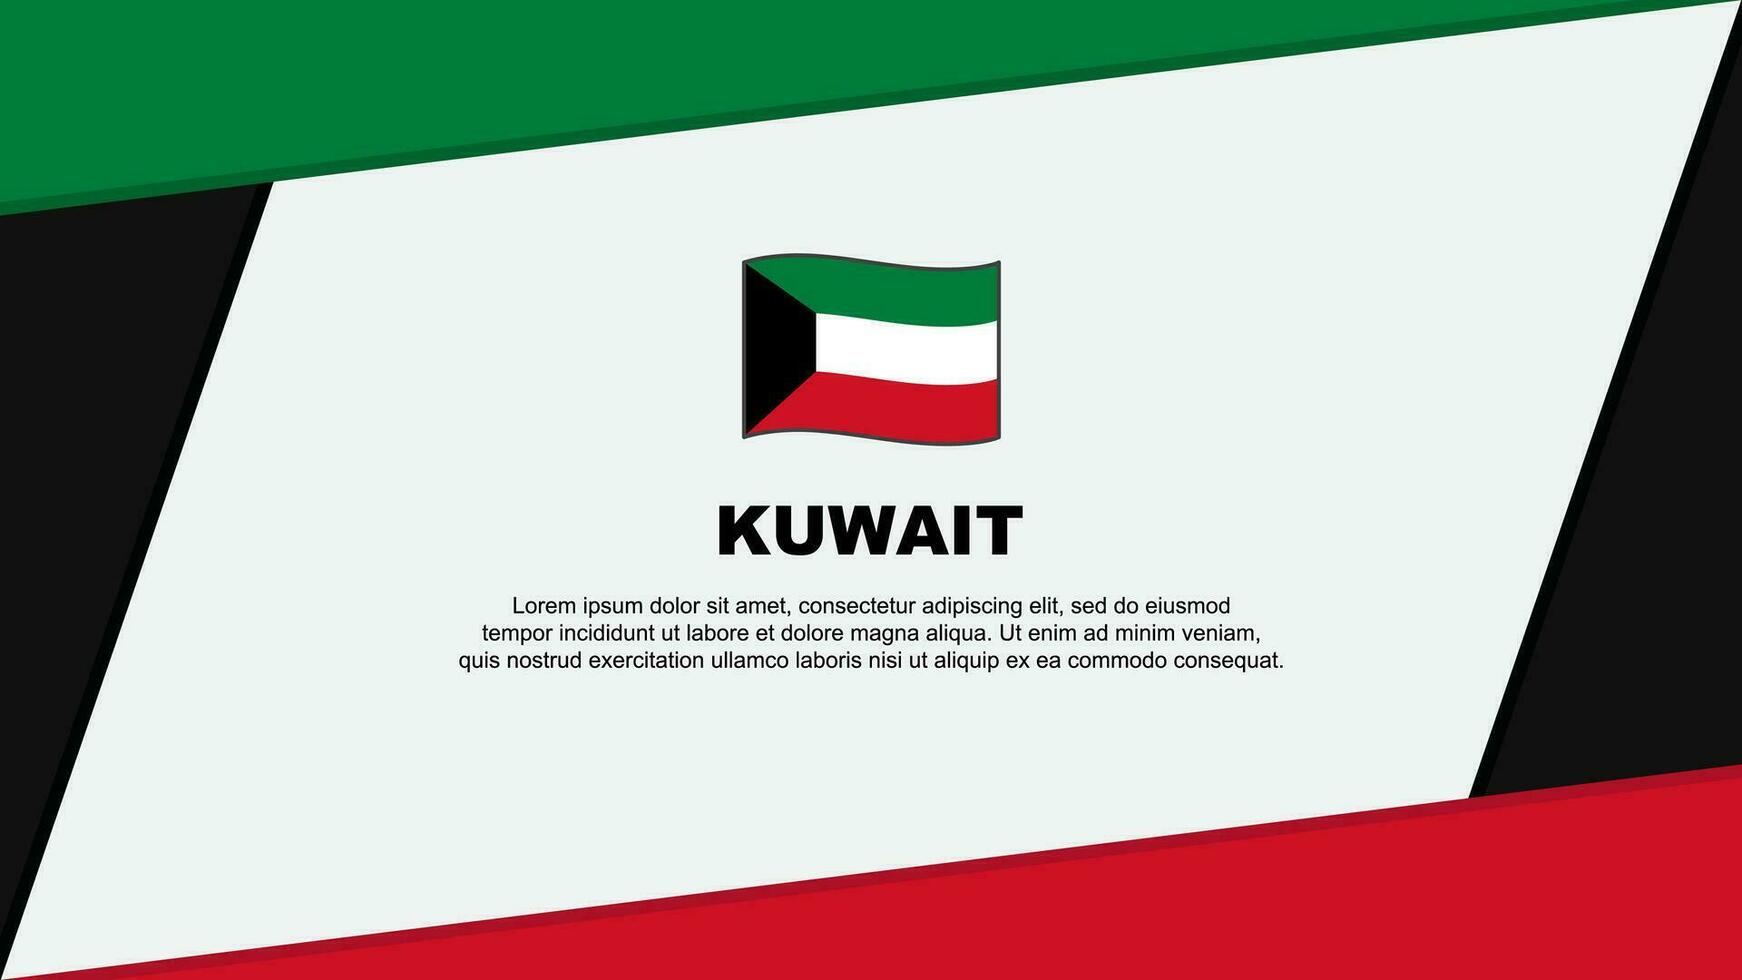 Kuwait Flag Abstract Background Design Template. Kuwait Independence Day Banner Cartoon Vector Illustration. Kuwait Independence Day